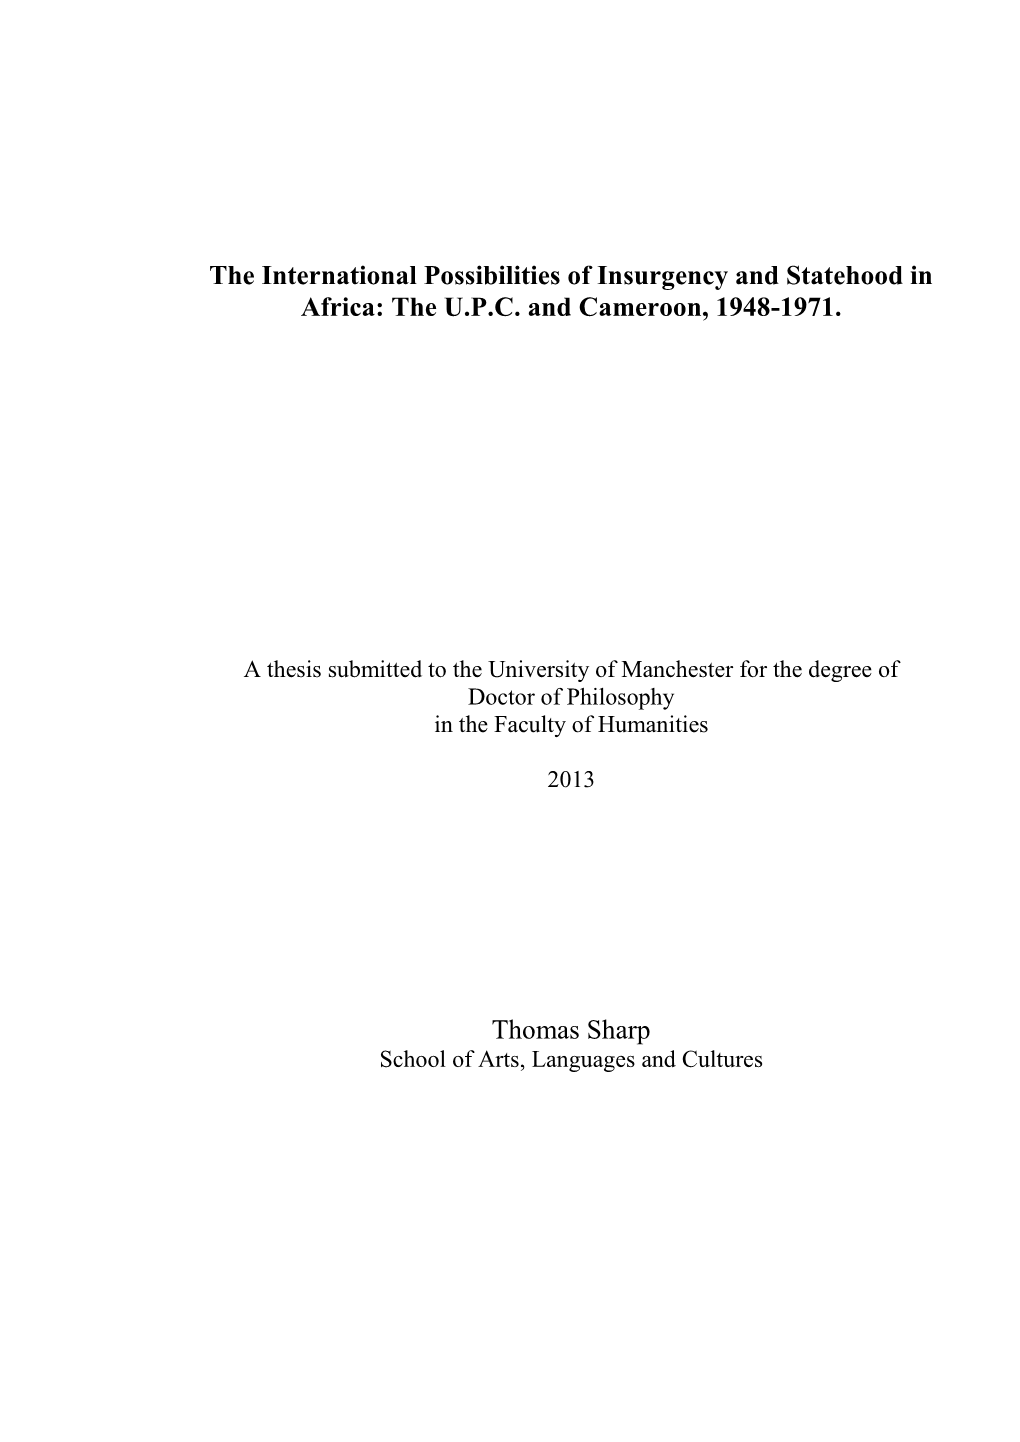 The International Possibilities of Insurgency and Statehood in Africa: the U.P.C